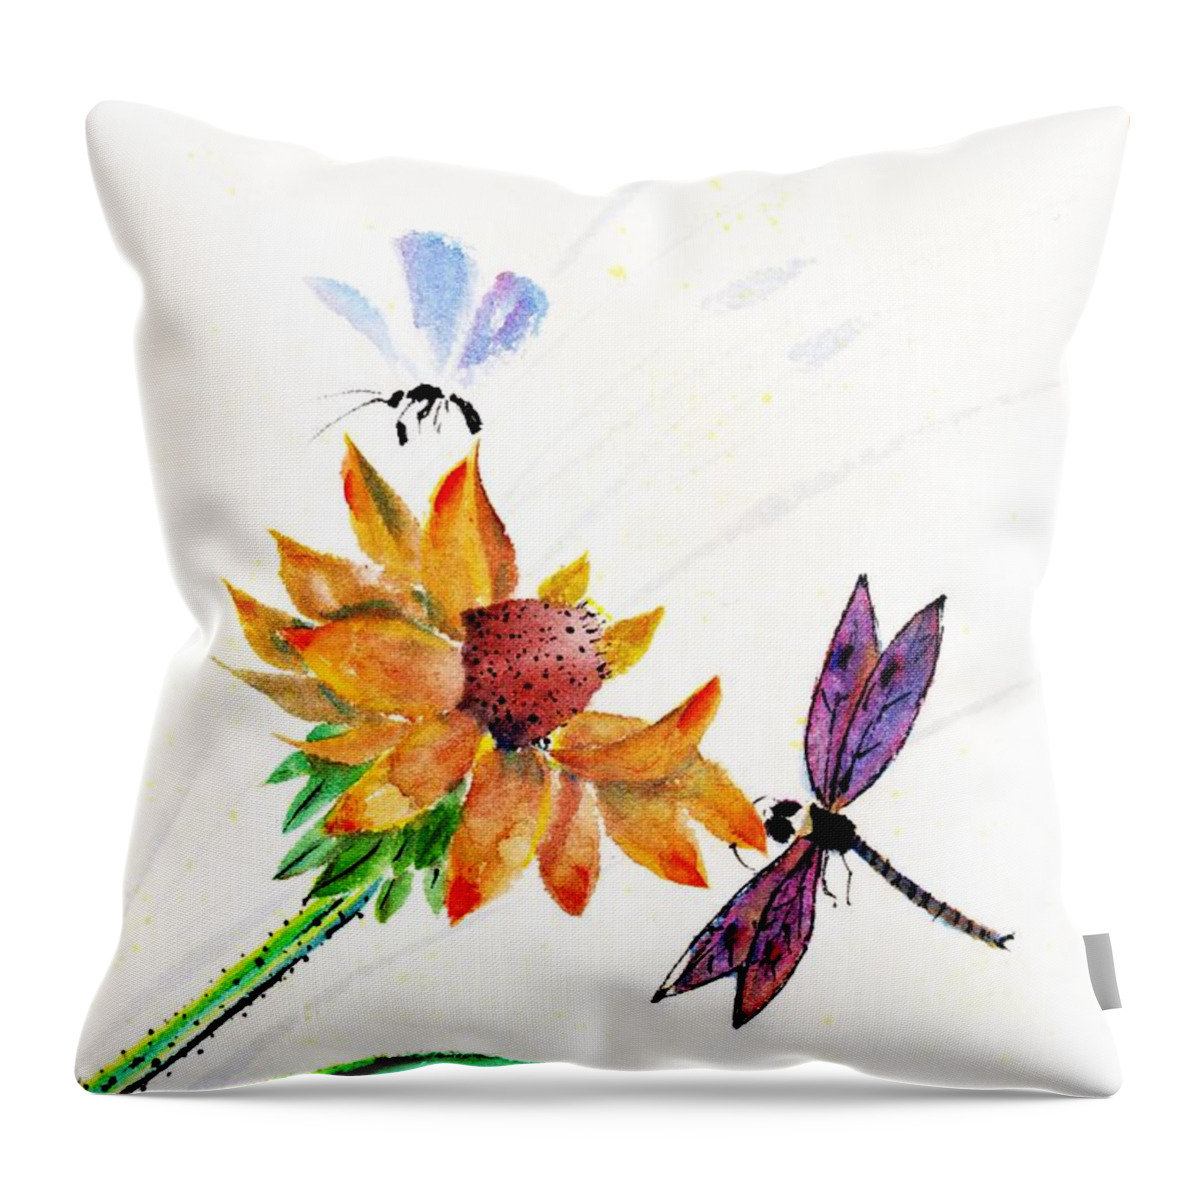 Chinese Brush Painting Throw Pillow featuring the painting Collaboration by Bill Searle